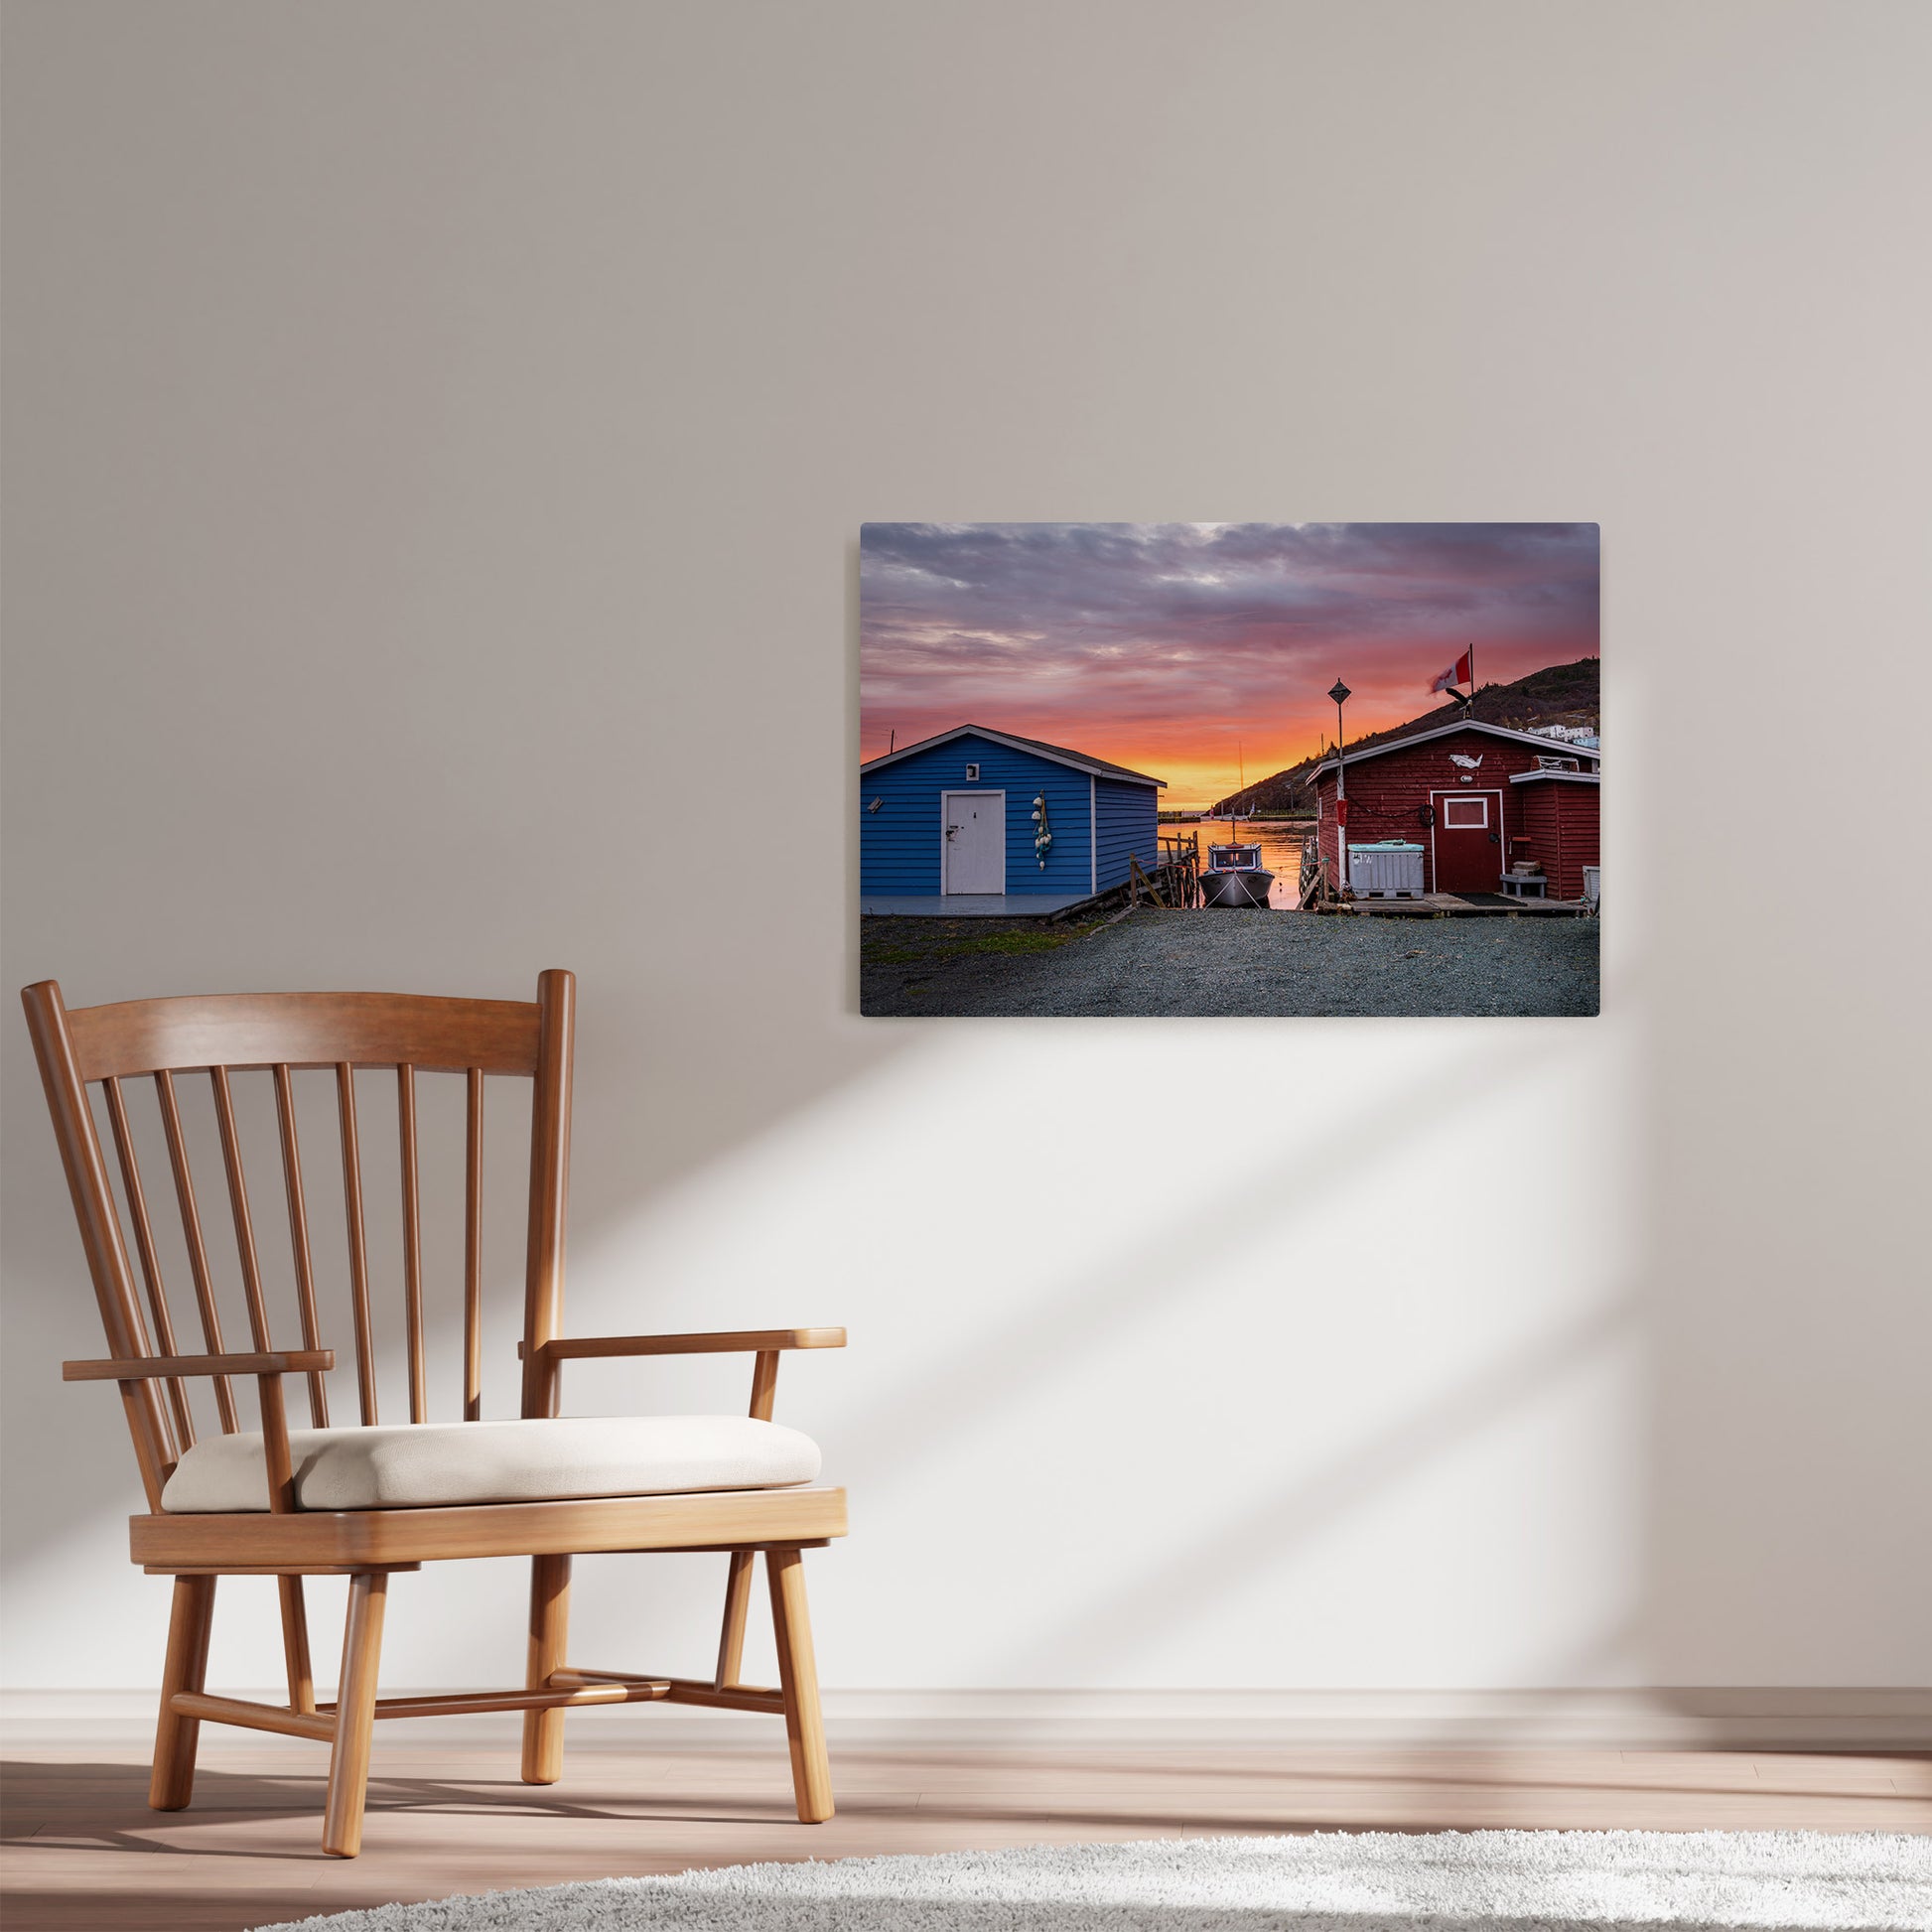 Ray Mackey's Petty Harbour Calm photography reproduced on HD metal print and displayed on wall